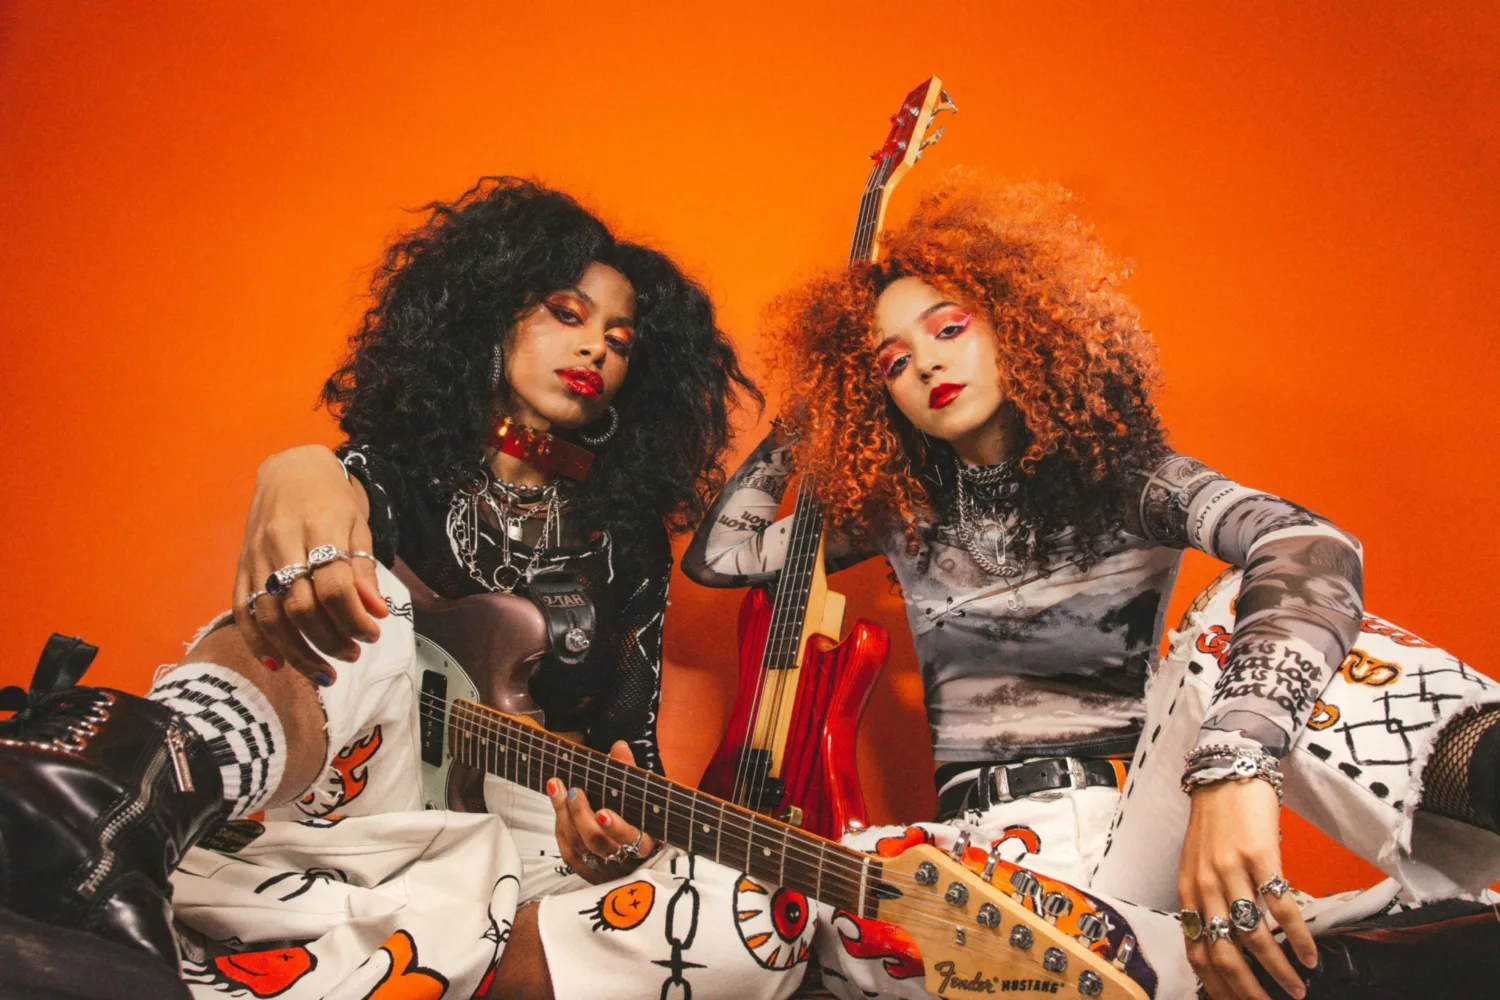 Nova Twins and Yonaka to appear at Sound City+ Conference